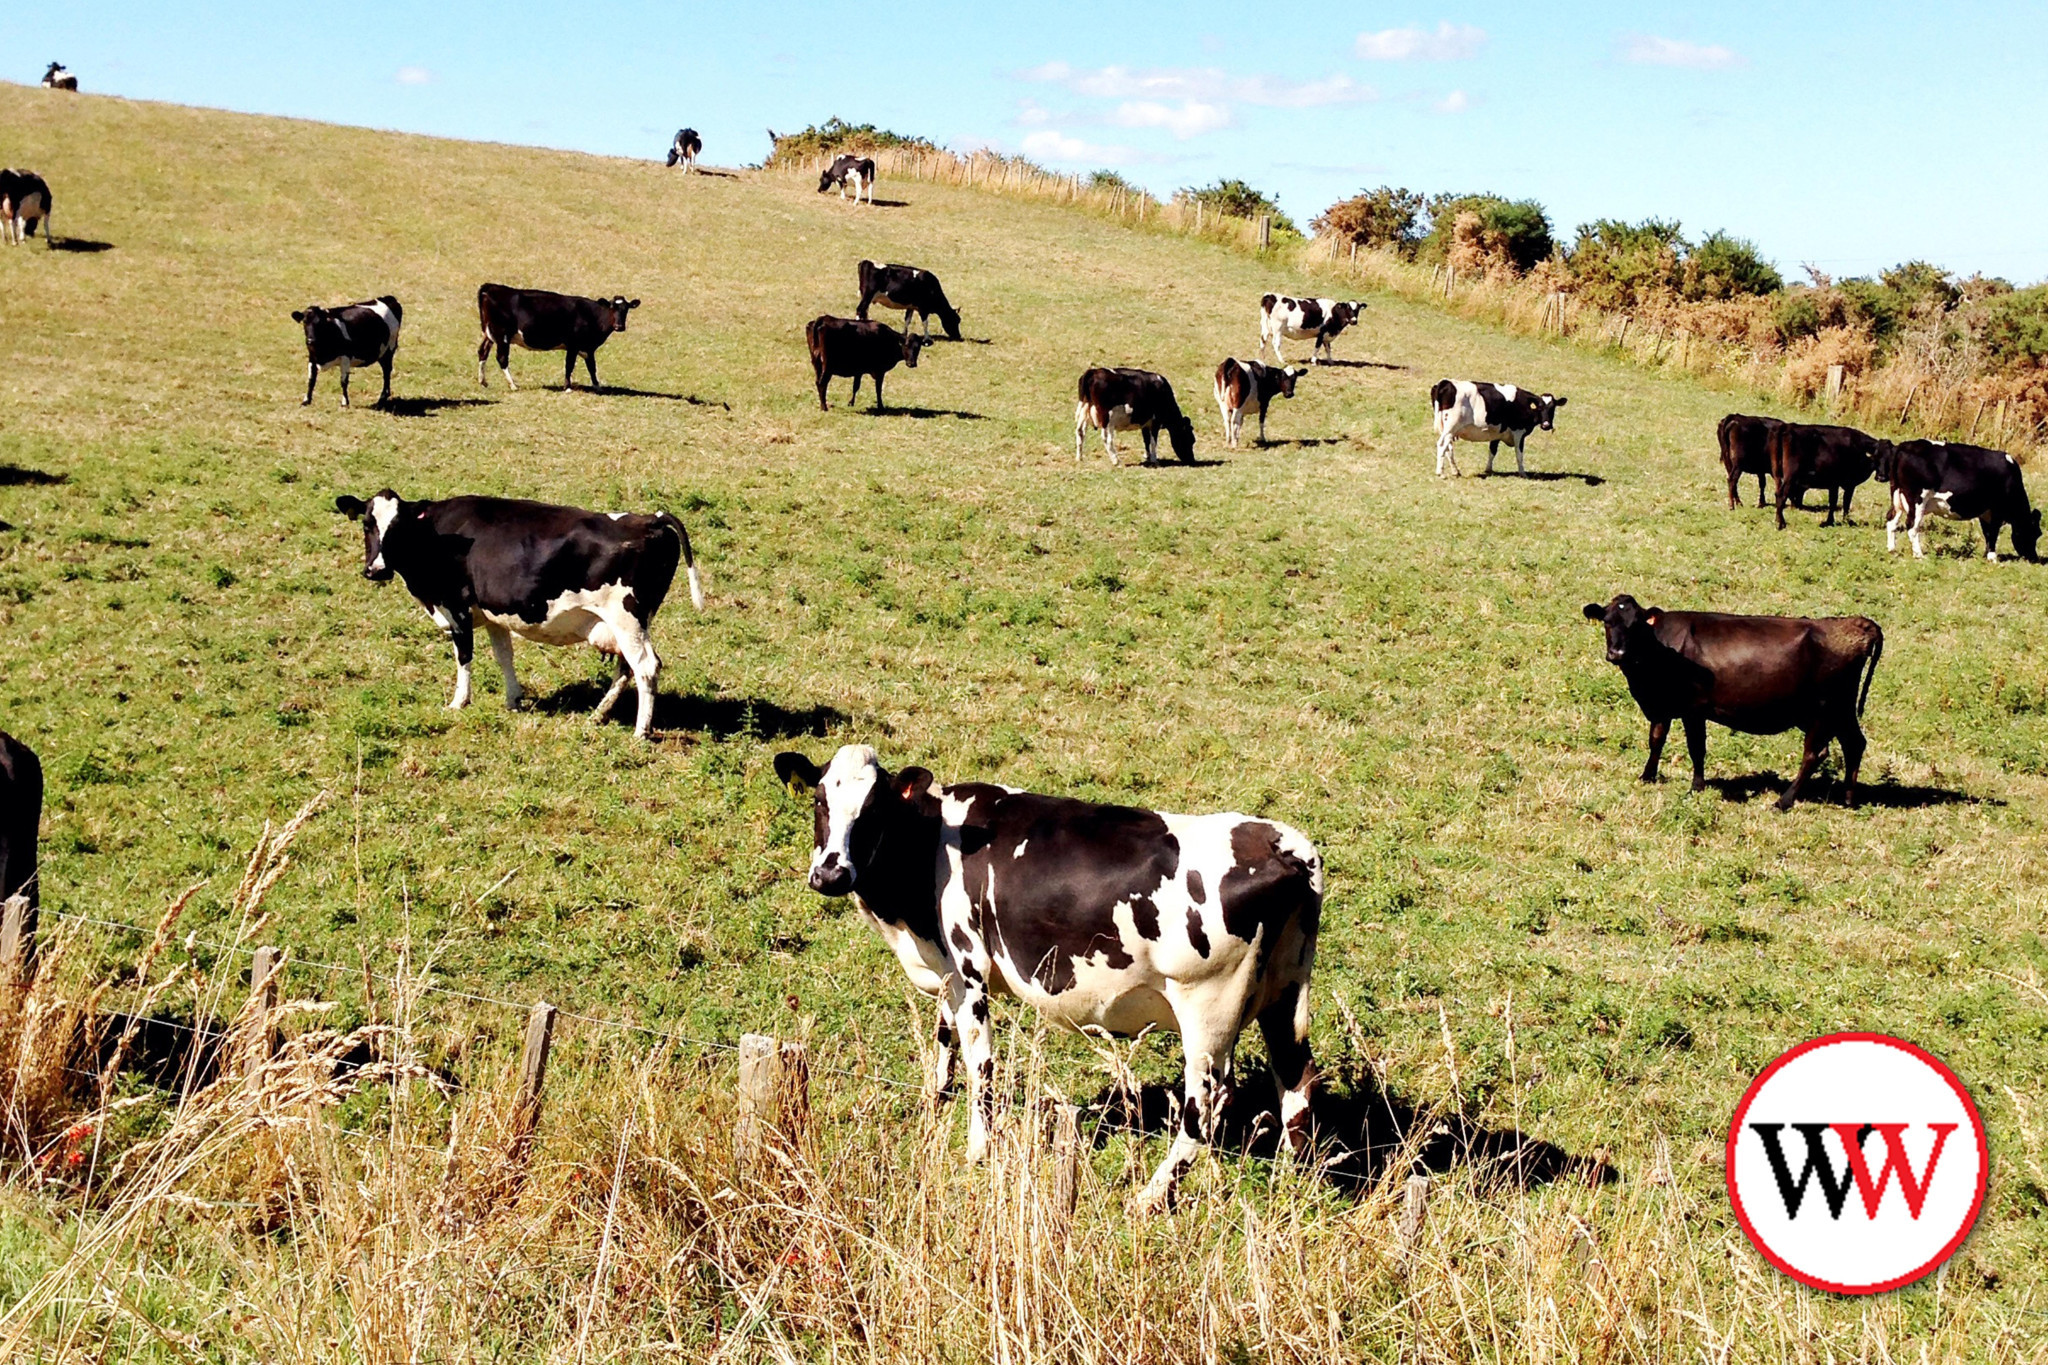 Containment feeding may protect paddocks - feature photo